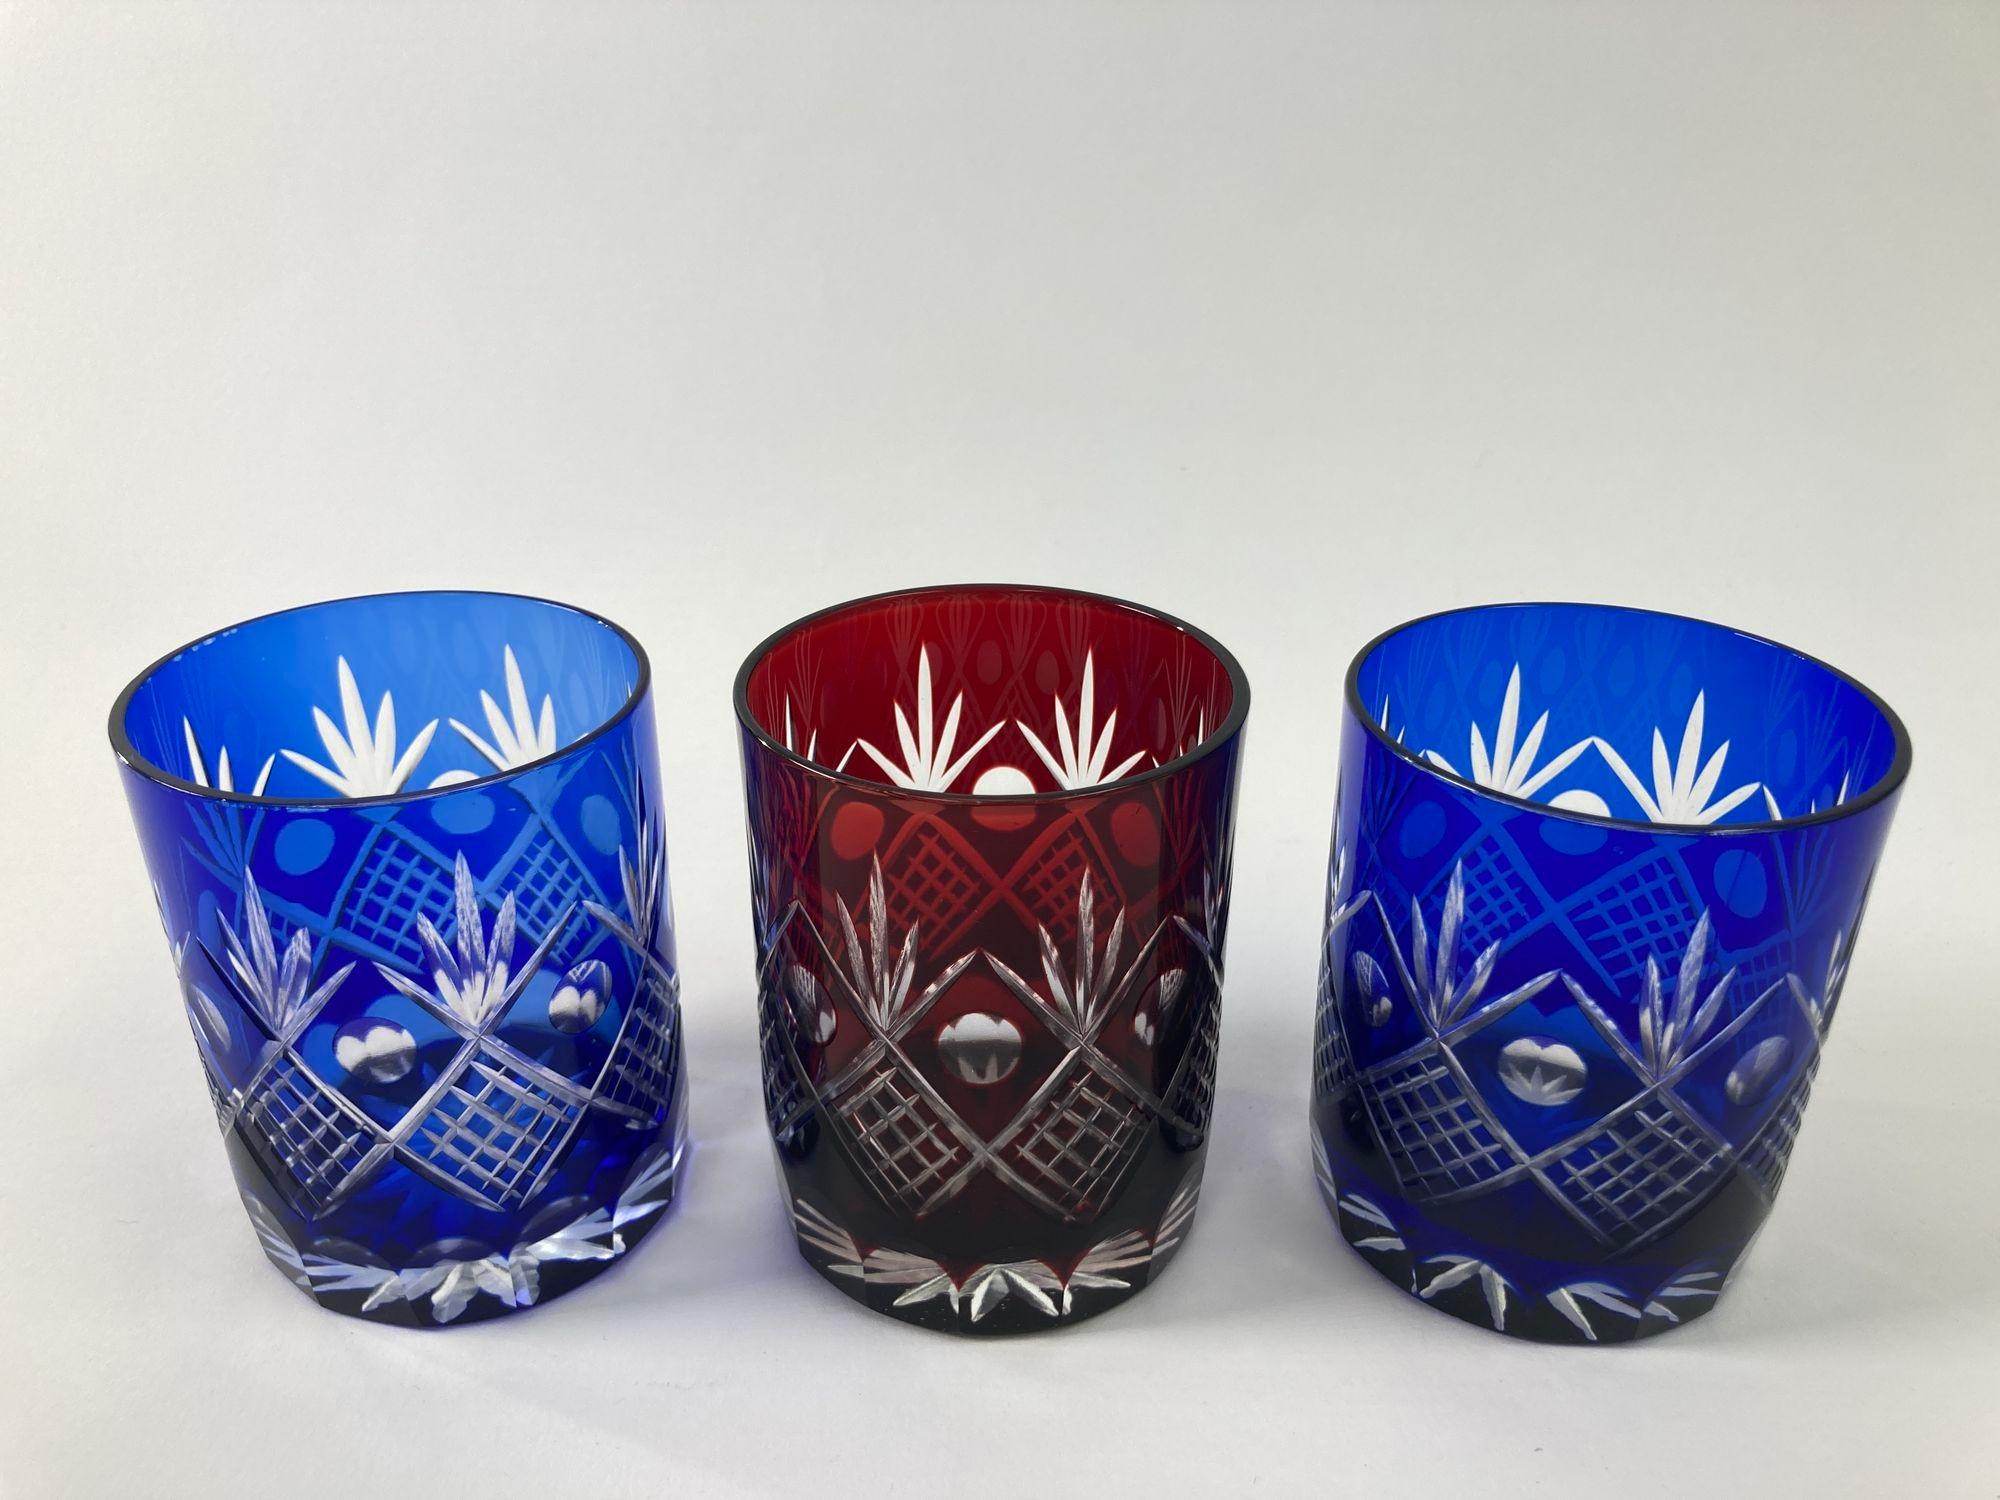 1970 Whiskey Glasses Tumbler Baccarat Style Blue and Red Cut Crystal Set of 3 For Sale 11